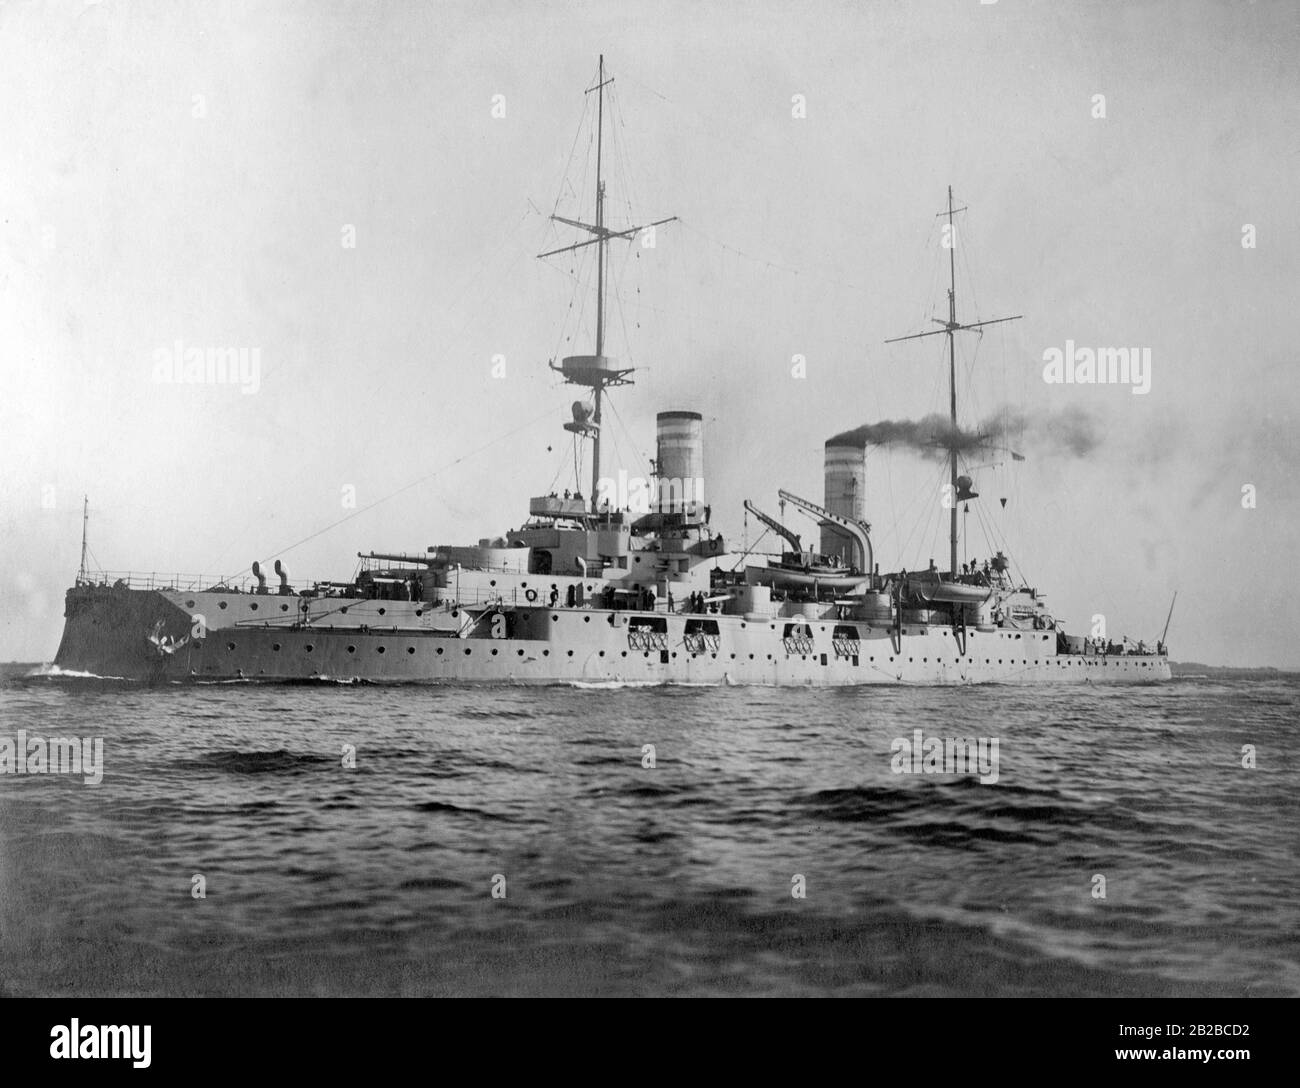 The armoured ship 'Kaiser Barbarossa' was the last ship of the Kaiser Friedrich class, one of the five classes of liners of the Imperial Navy. After it was used in the First World War, it was scrapped in 1920. Stock Photo